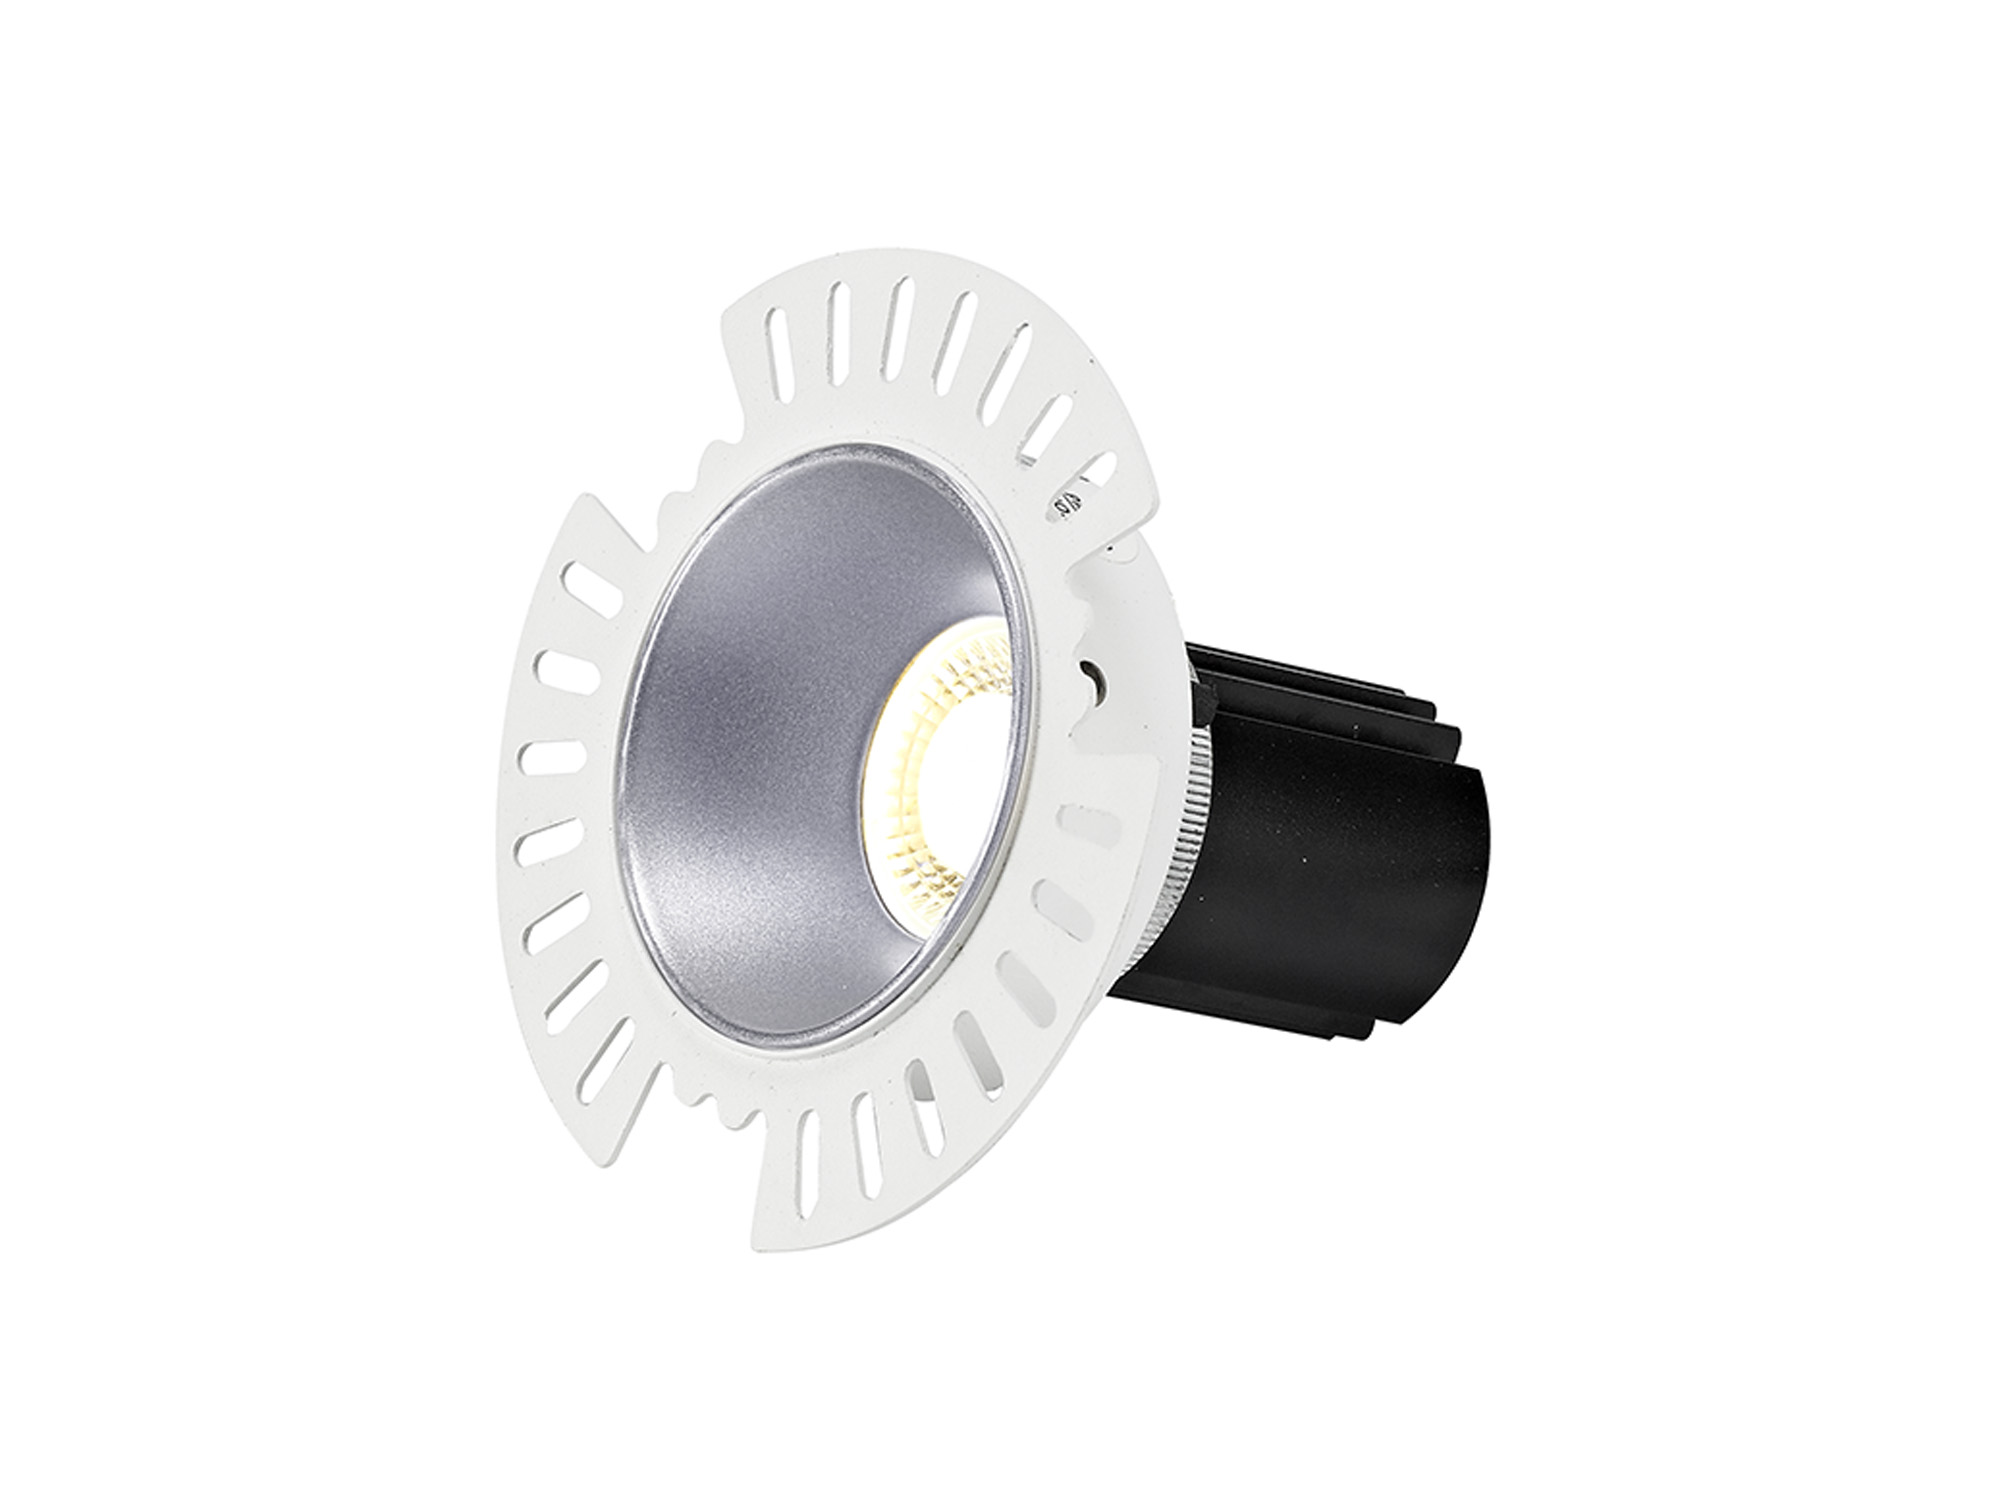 DM201820  Basy 12 Tridonic powered 12W 2700K 1200lm 12° CRI>90 LED Engine Silver Fixed Recessed Spotlight; IP20